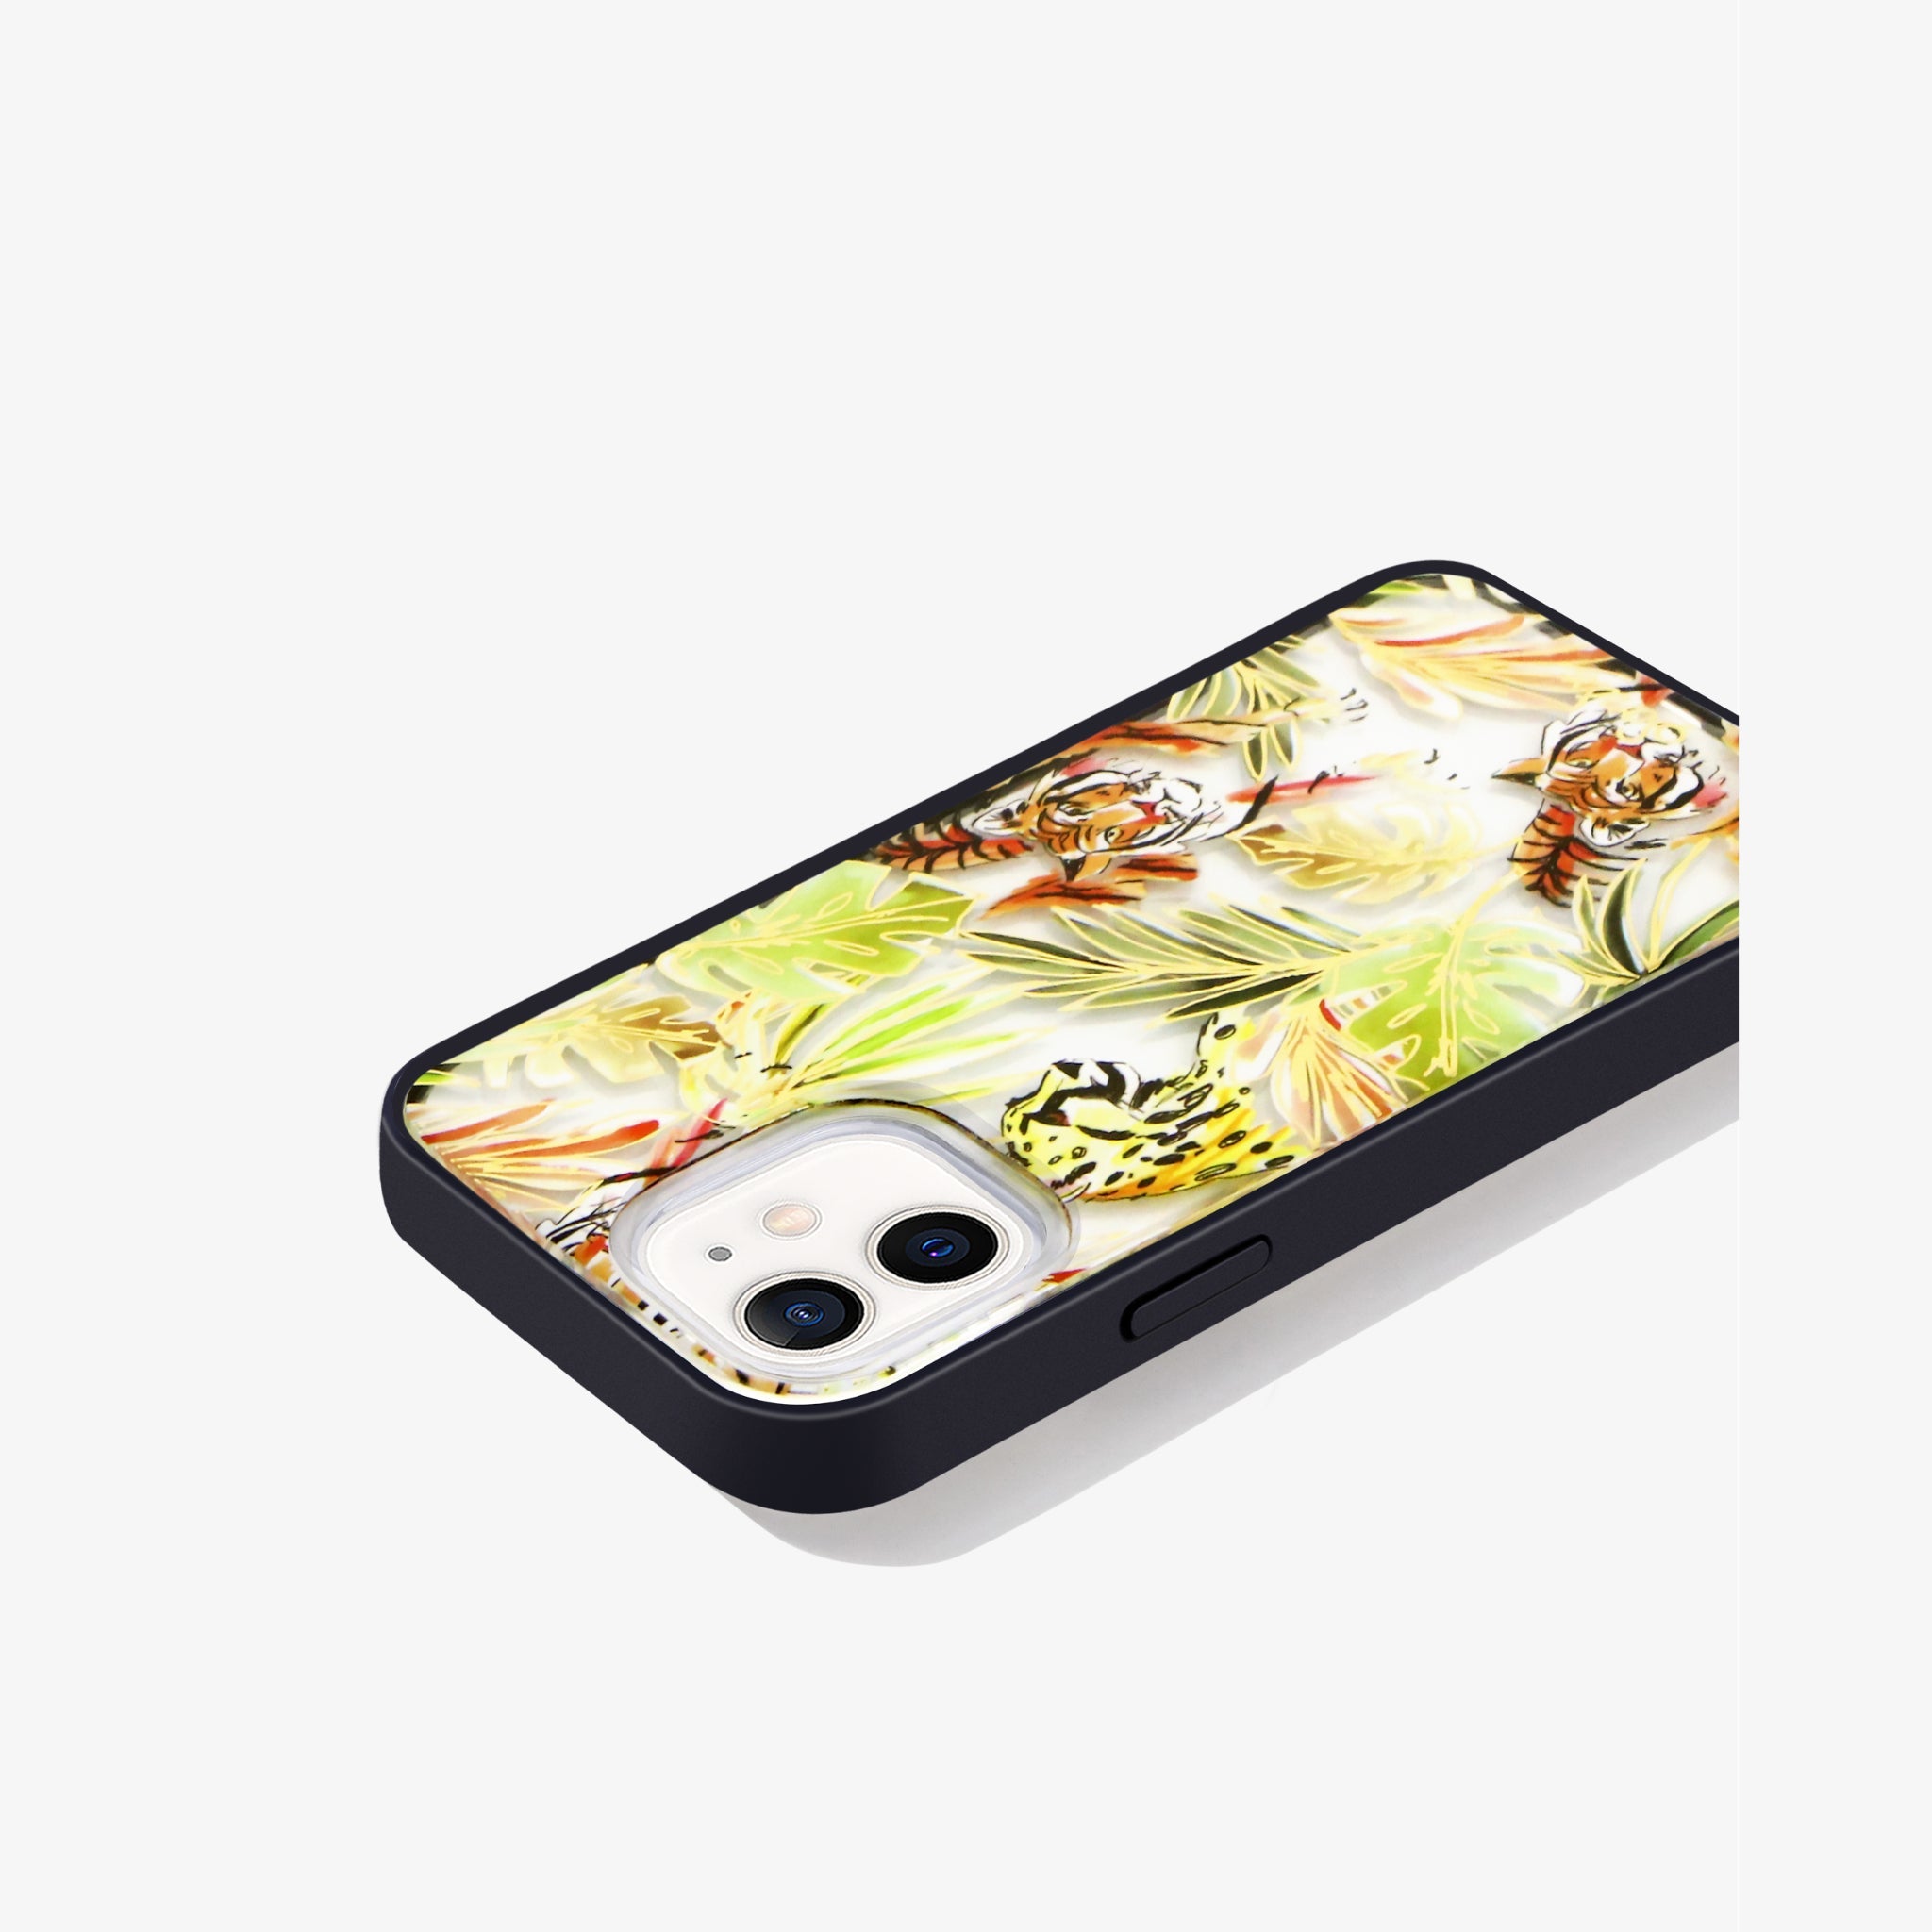 watercolor print of jungle cats with gold foil embroidered shown on an iphone 12 side view